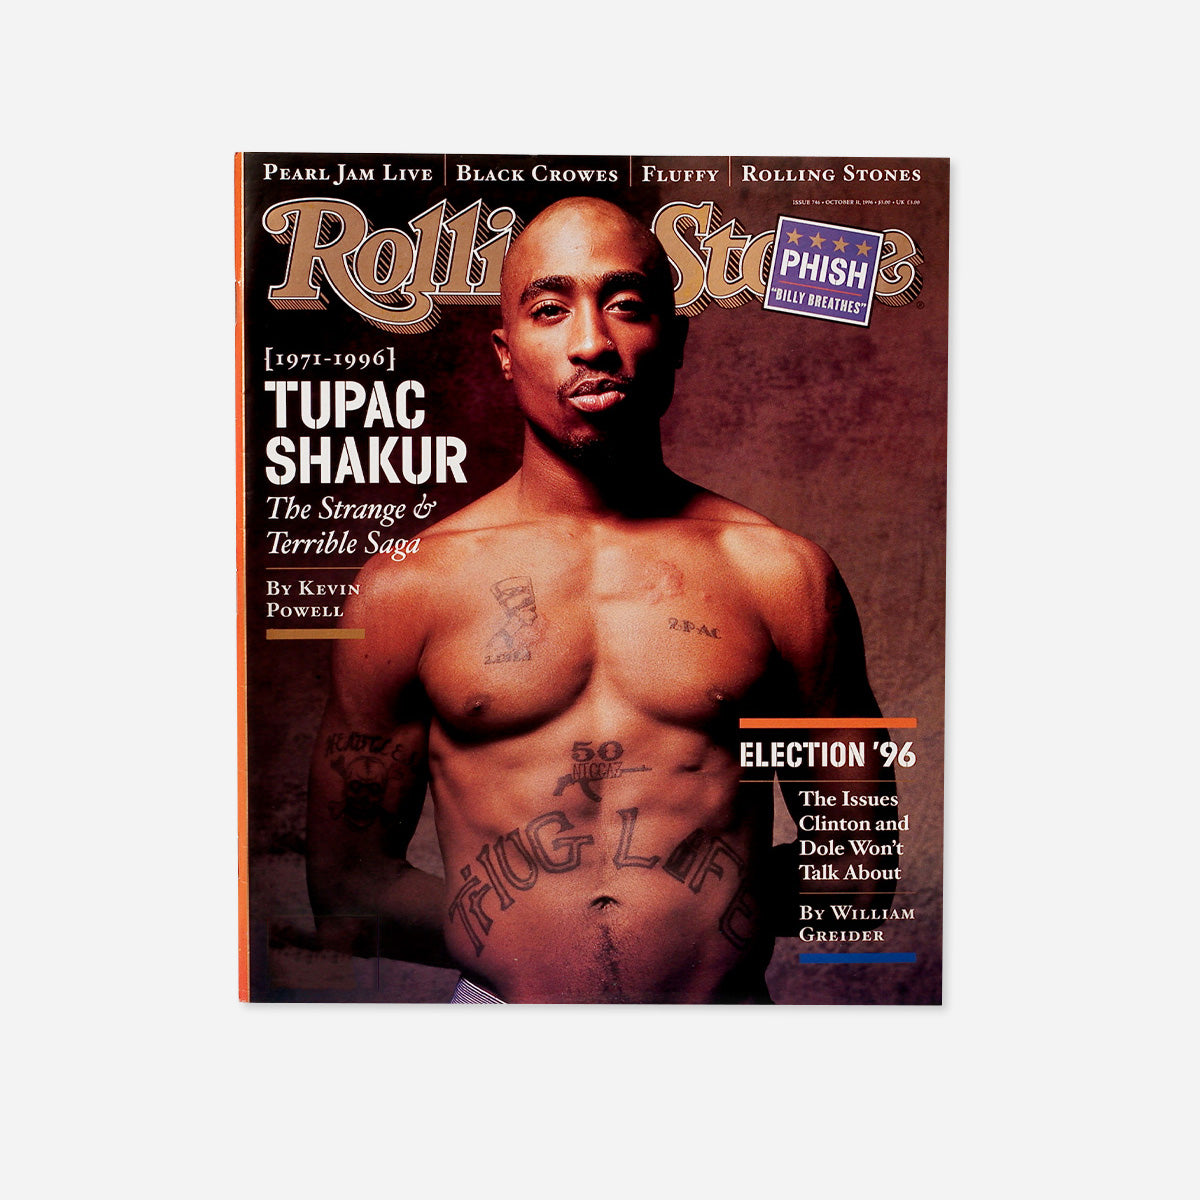 Rolling Stone Magazine October 31, 1996 Featuring Tupac Shakur (Issue 746)